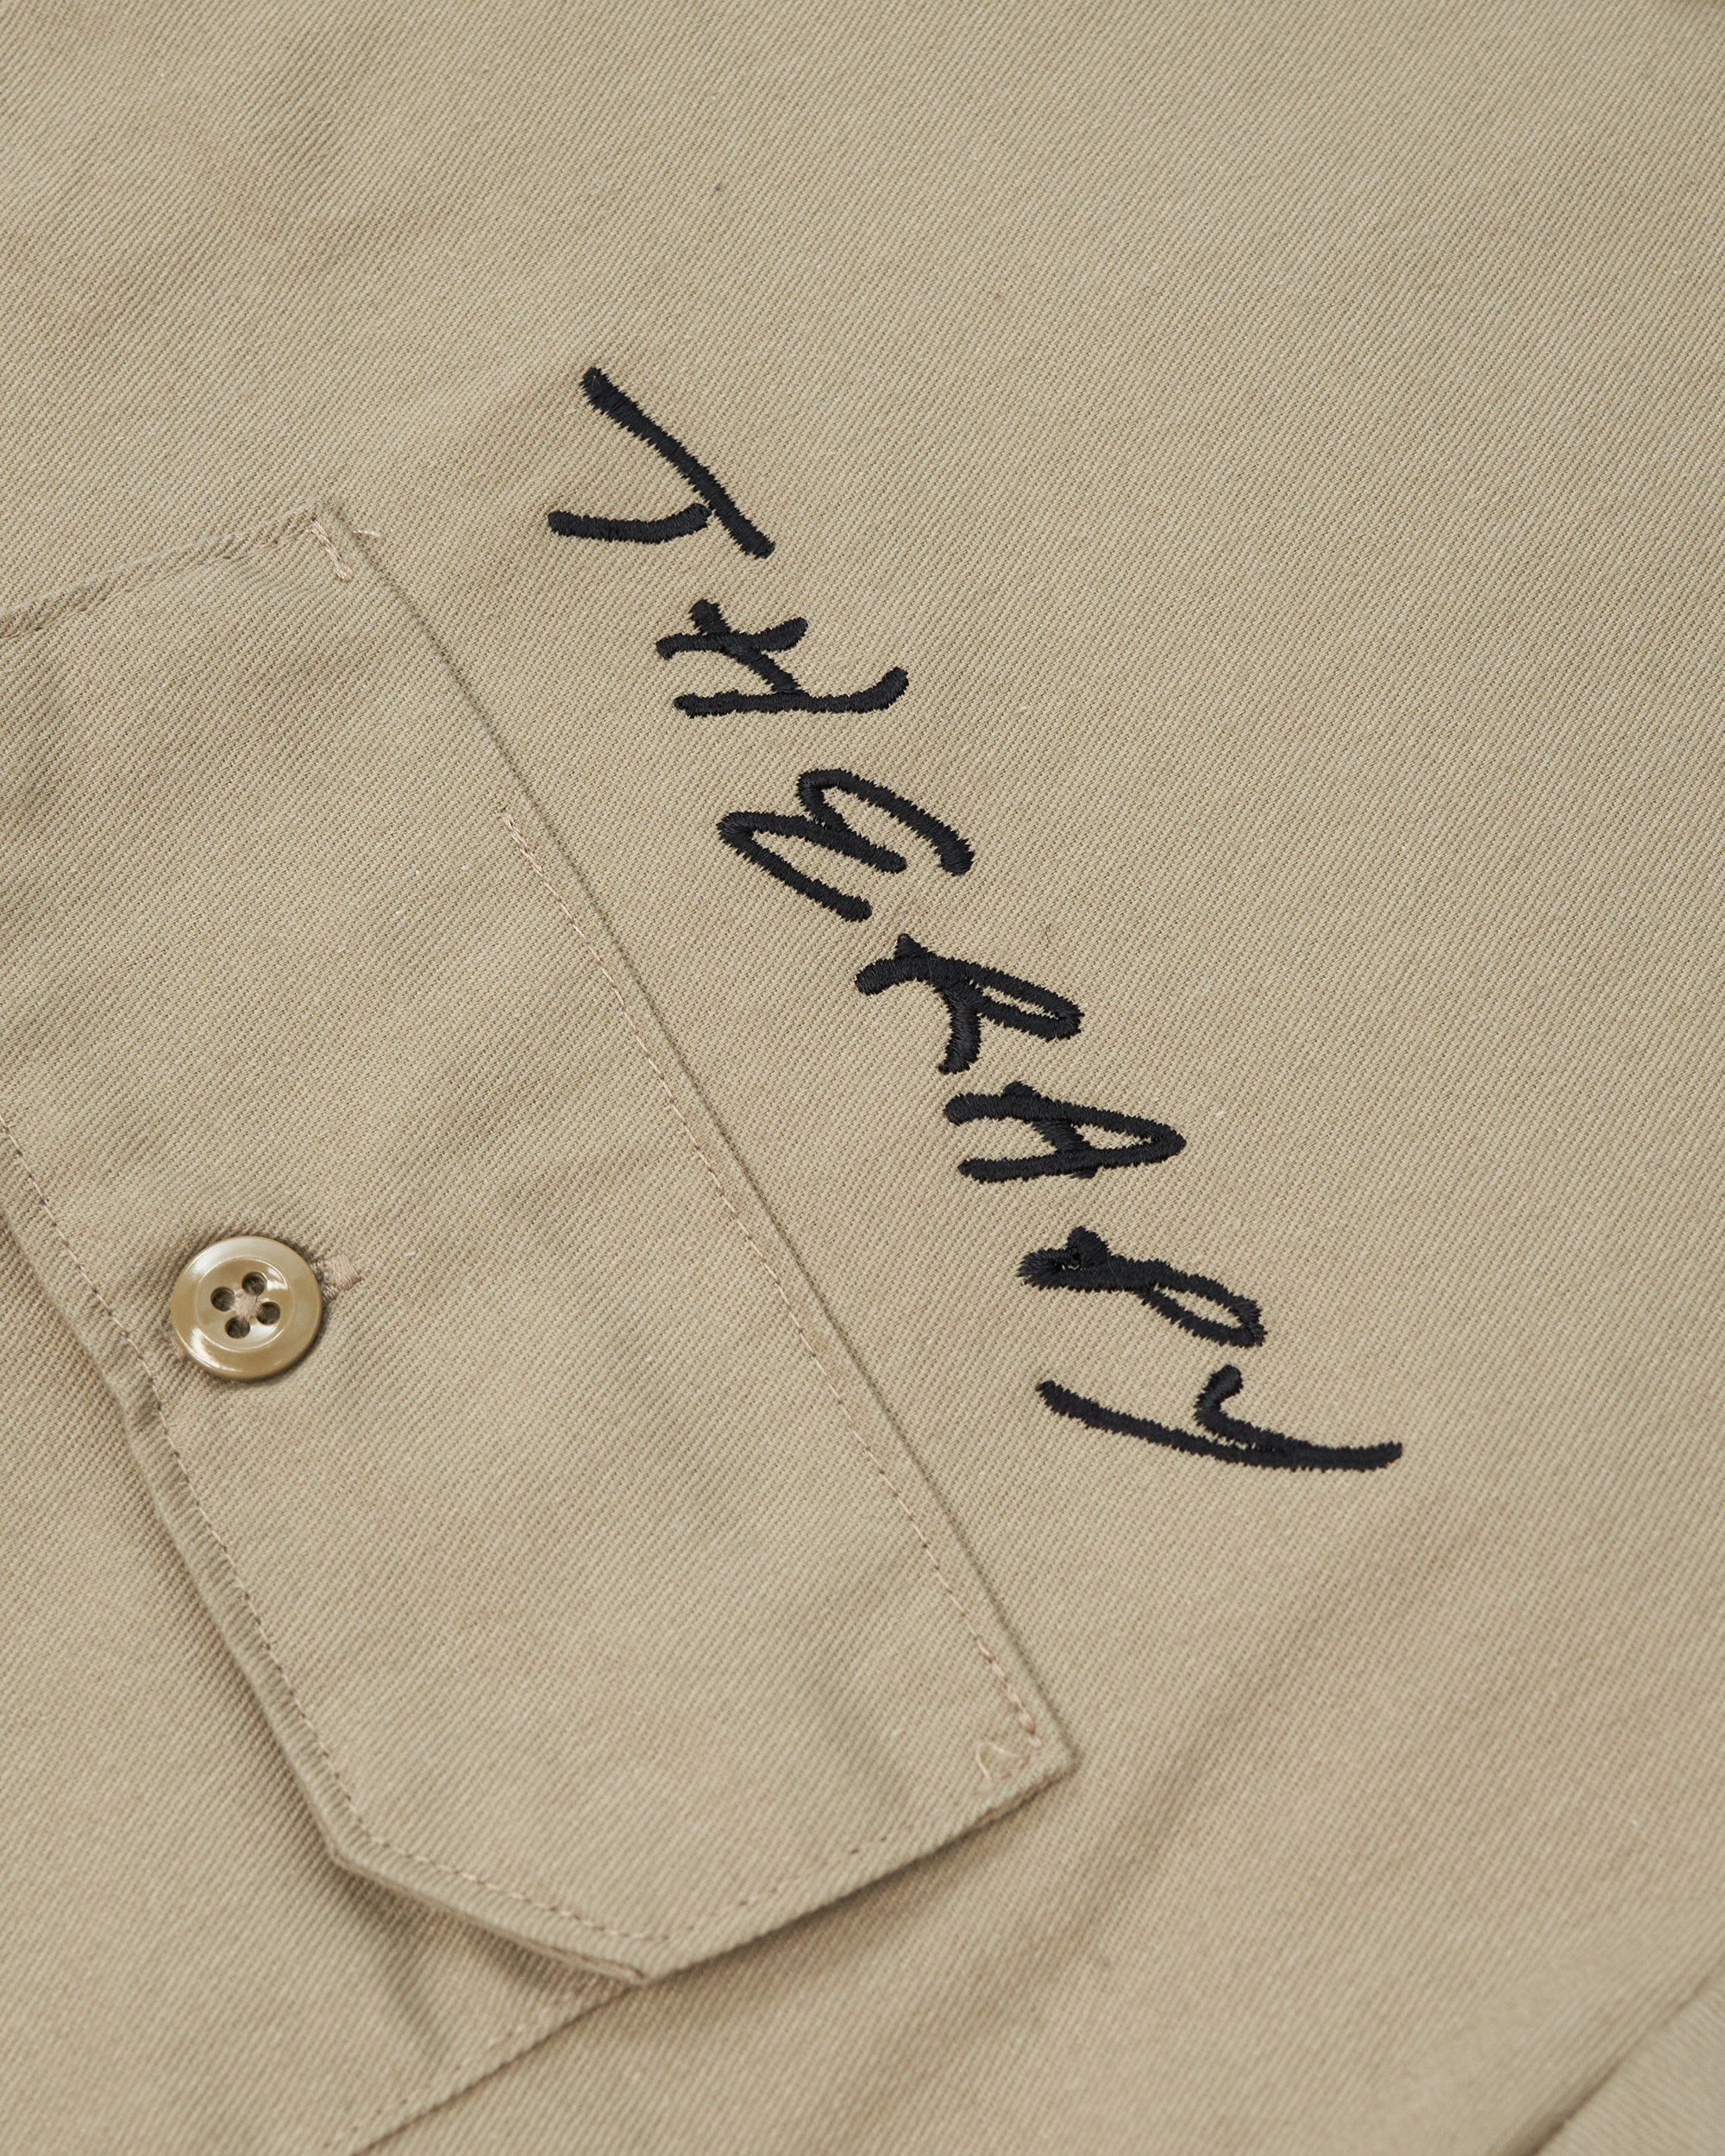 Therapy "Reloved" Dickies Work Shirt - Khaki